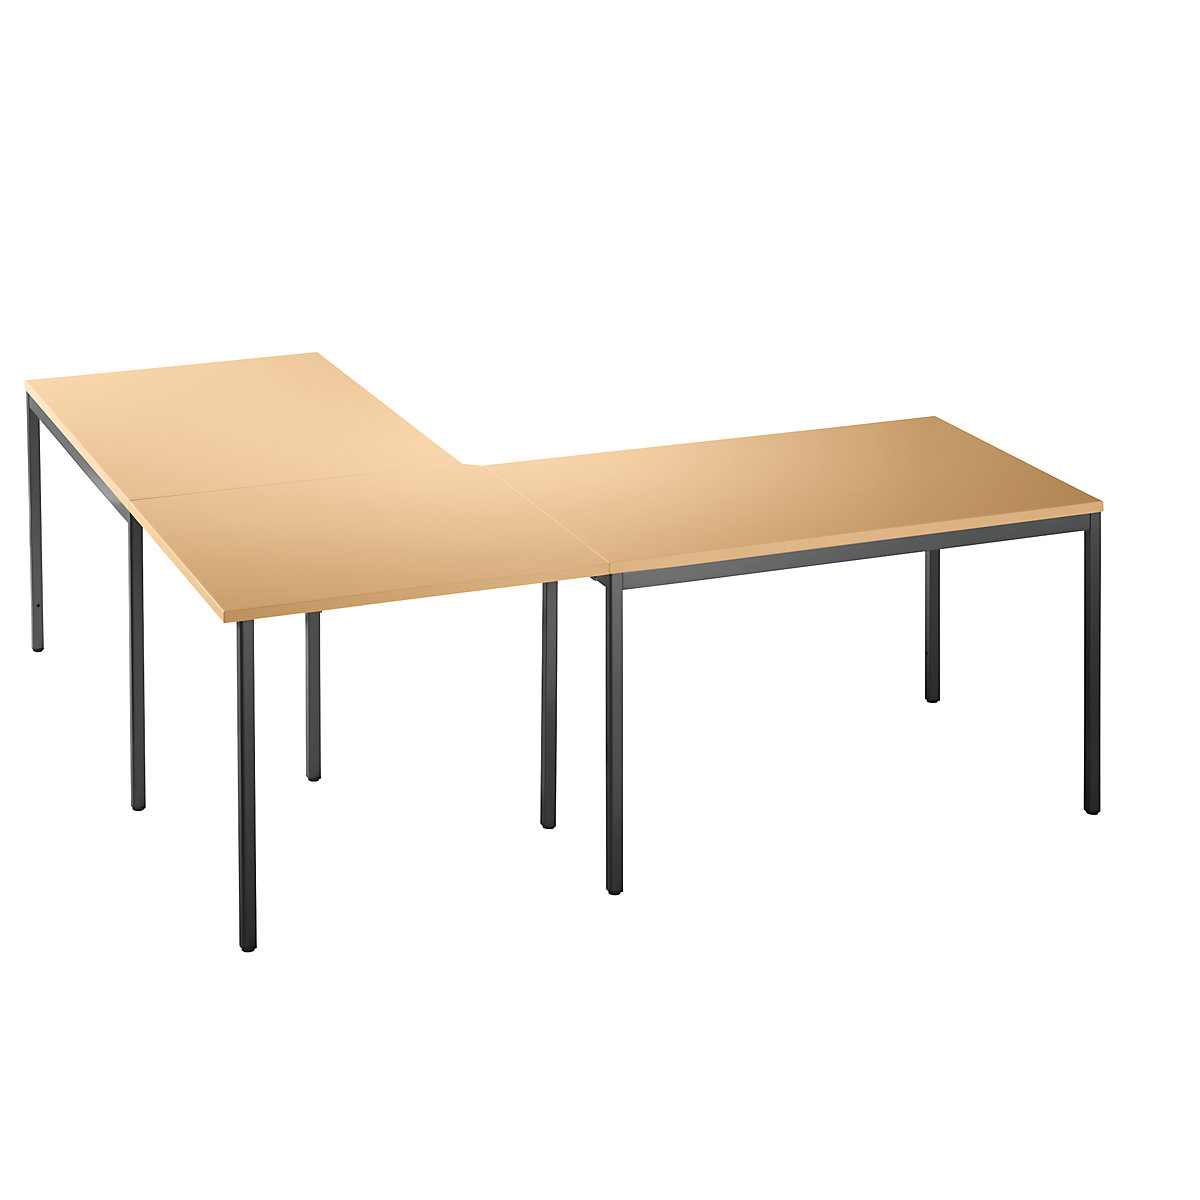 Linking top LENA, WxD 835 x 835 mm, with support leg, beech finish-4